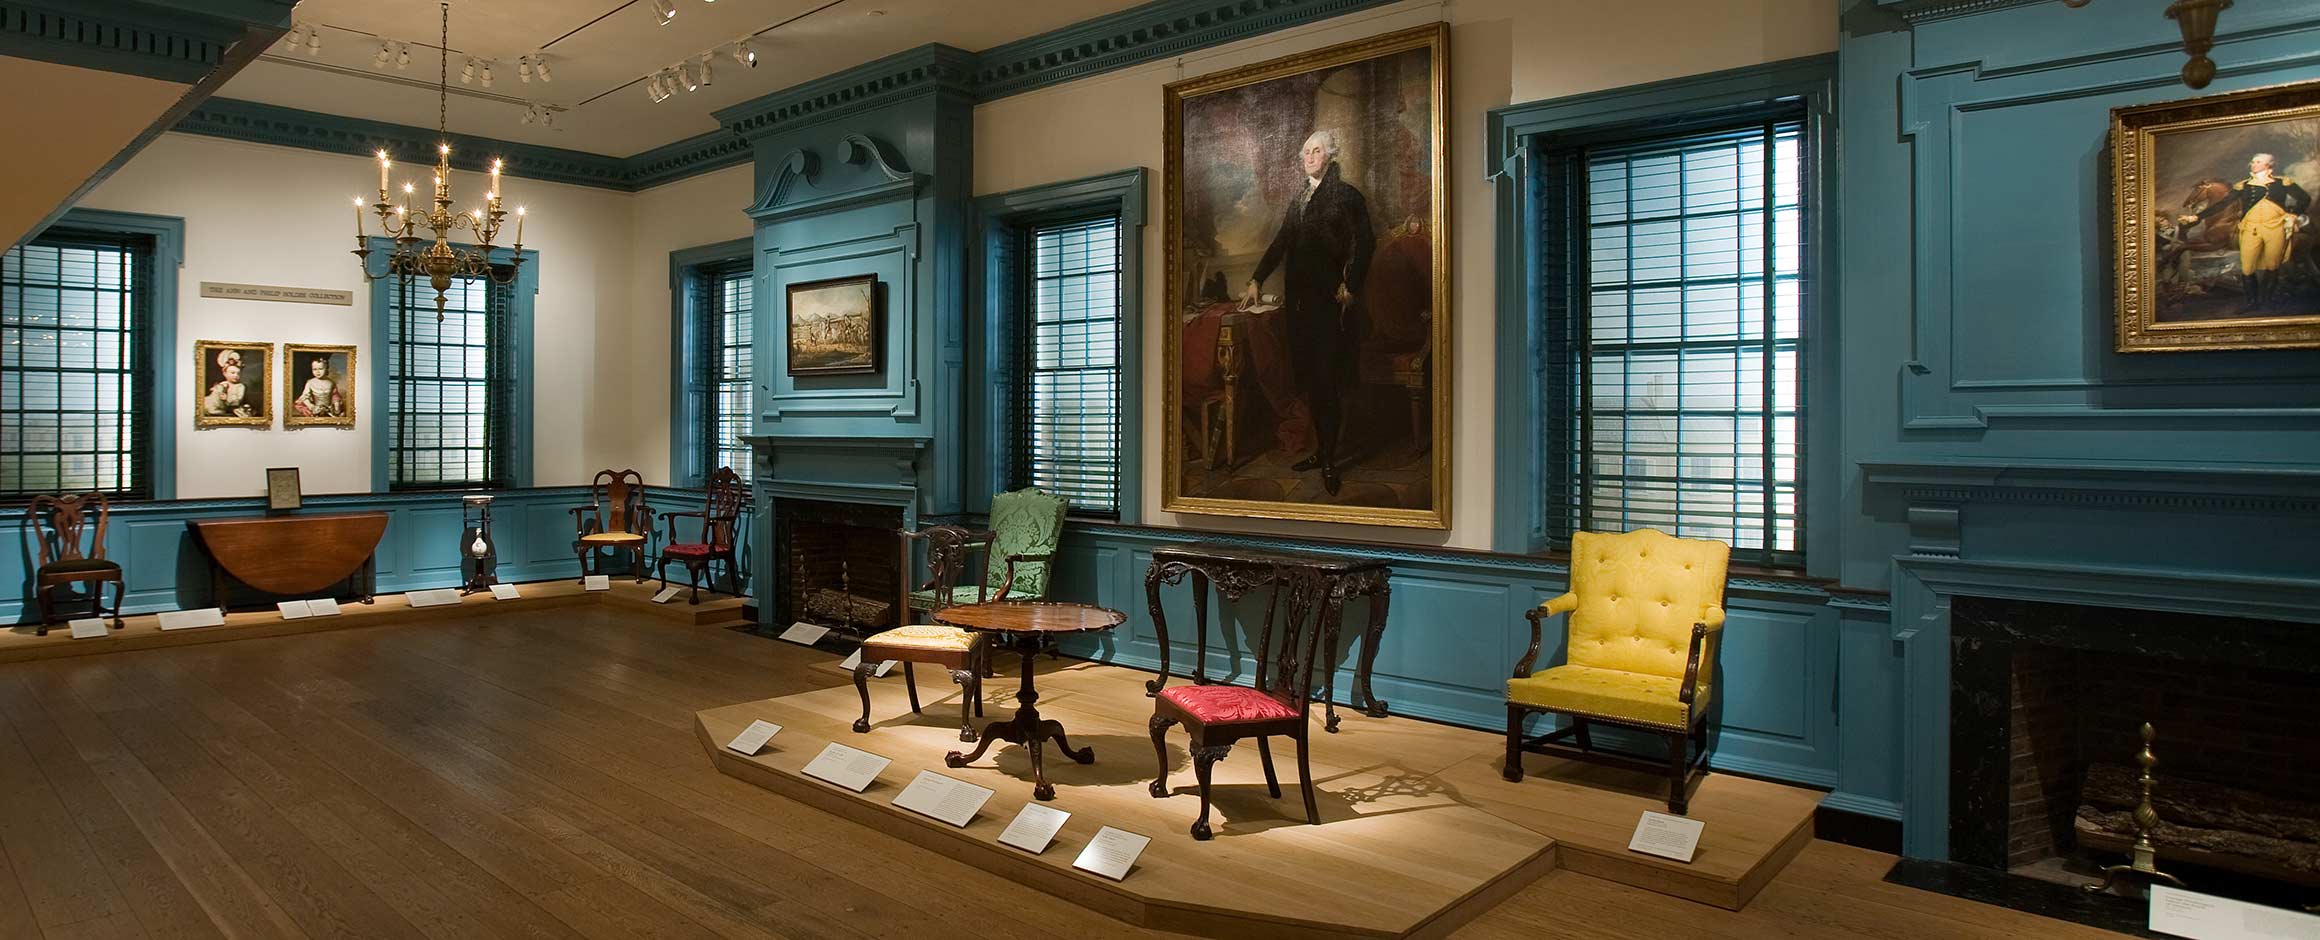 View of the Alexandria Ballroom with furniture on display and two paintings of George Washington